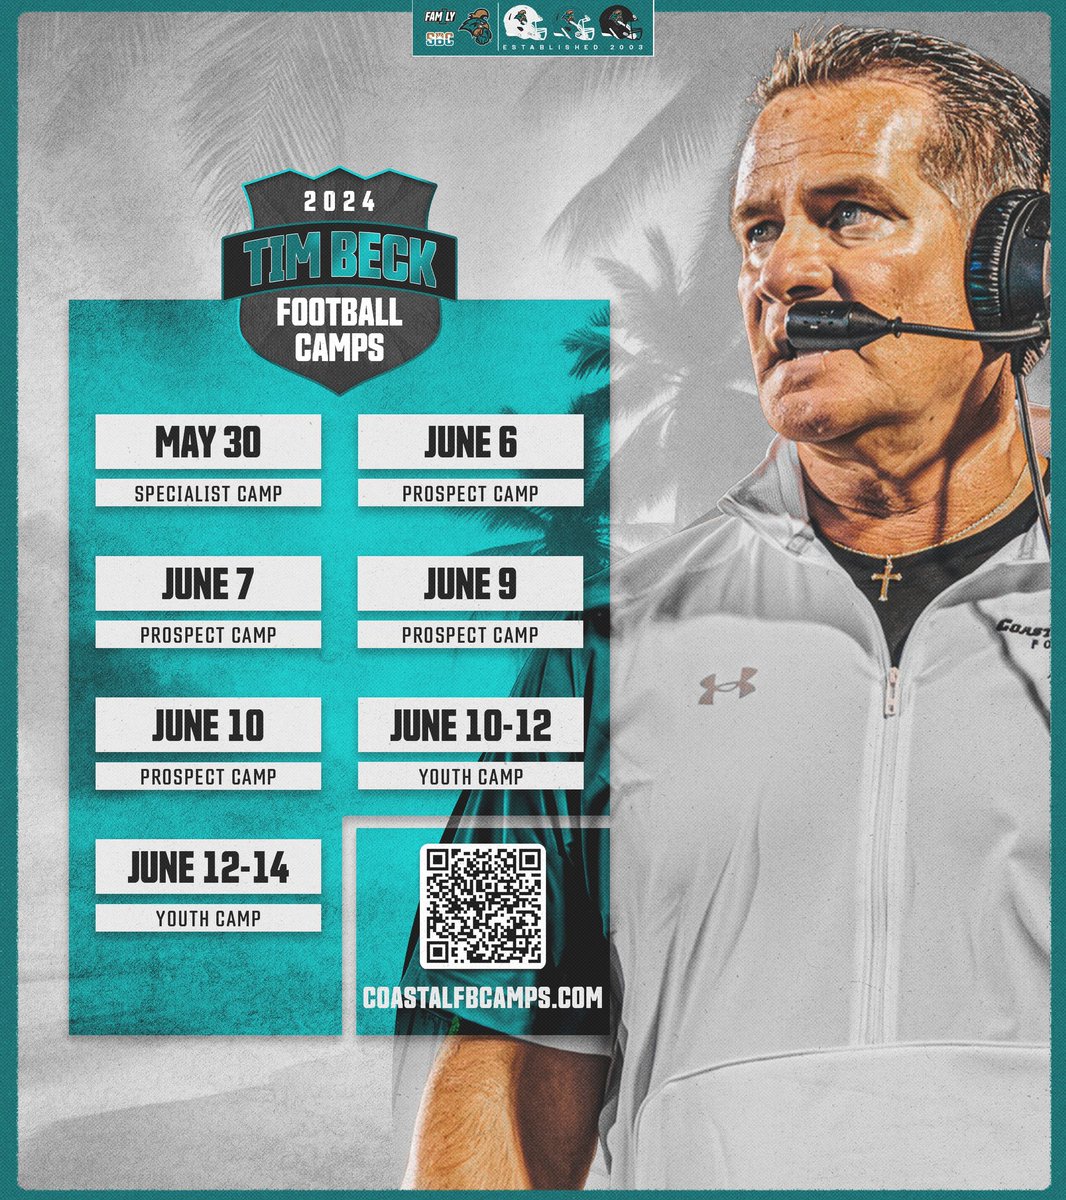 𝙂𝙚𝙩 𝙞𝙣 𝙩𝙝𝙚 𝙜𝙖𝙢𝙚! Camp dates are set! ⛺️: coastalfbcamps.com/About%20Us #BALLATTHEBEACH | #FAM1LY | #TEALNATION